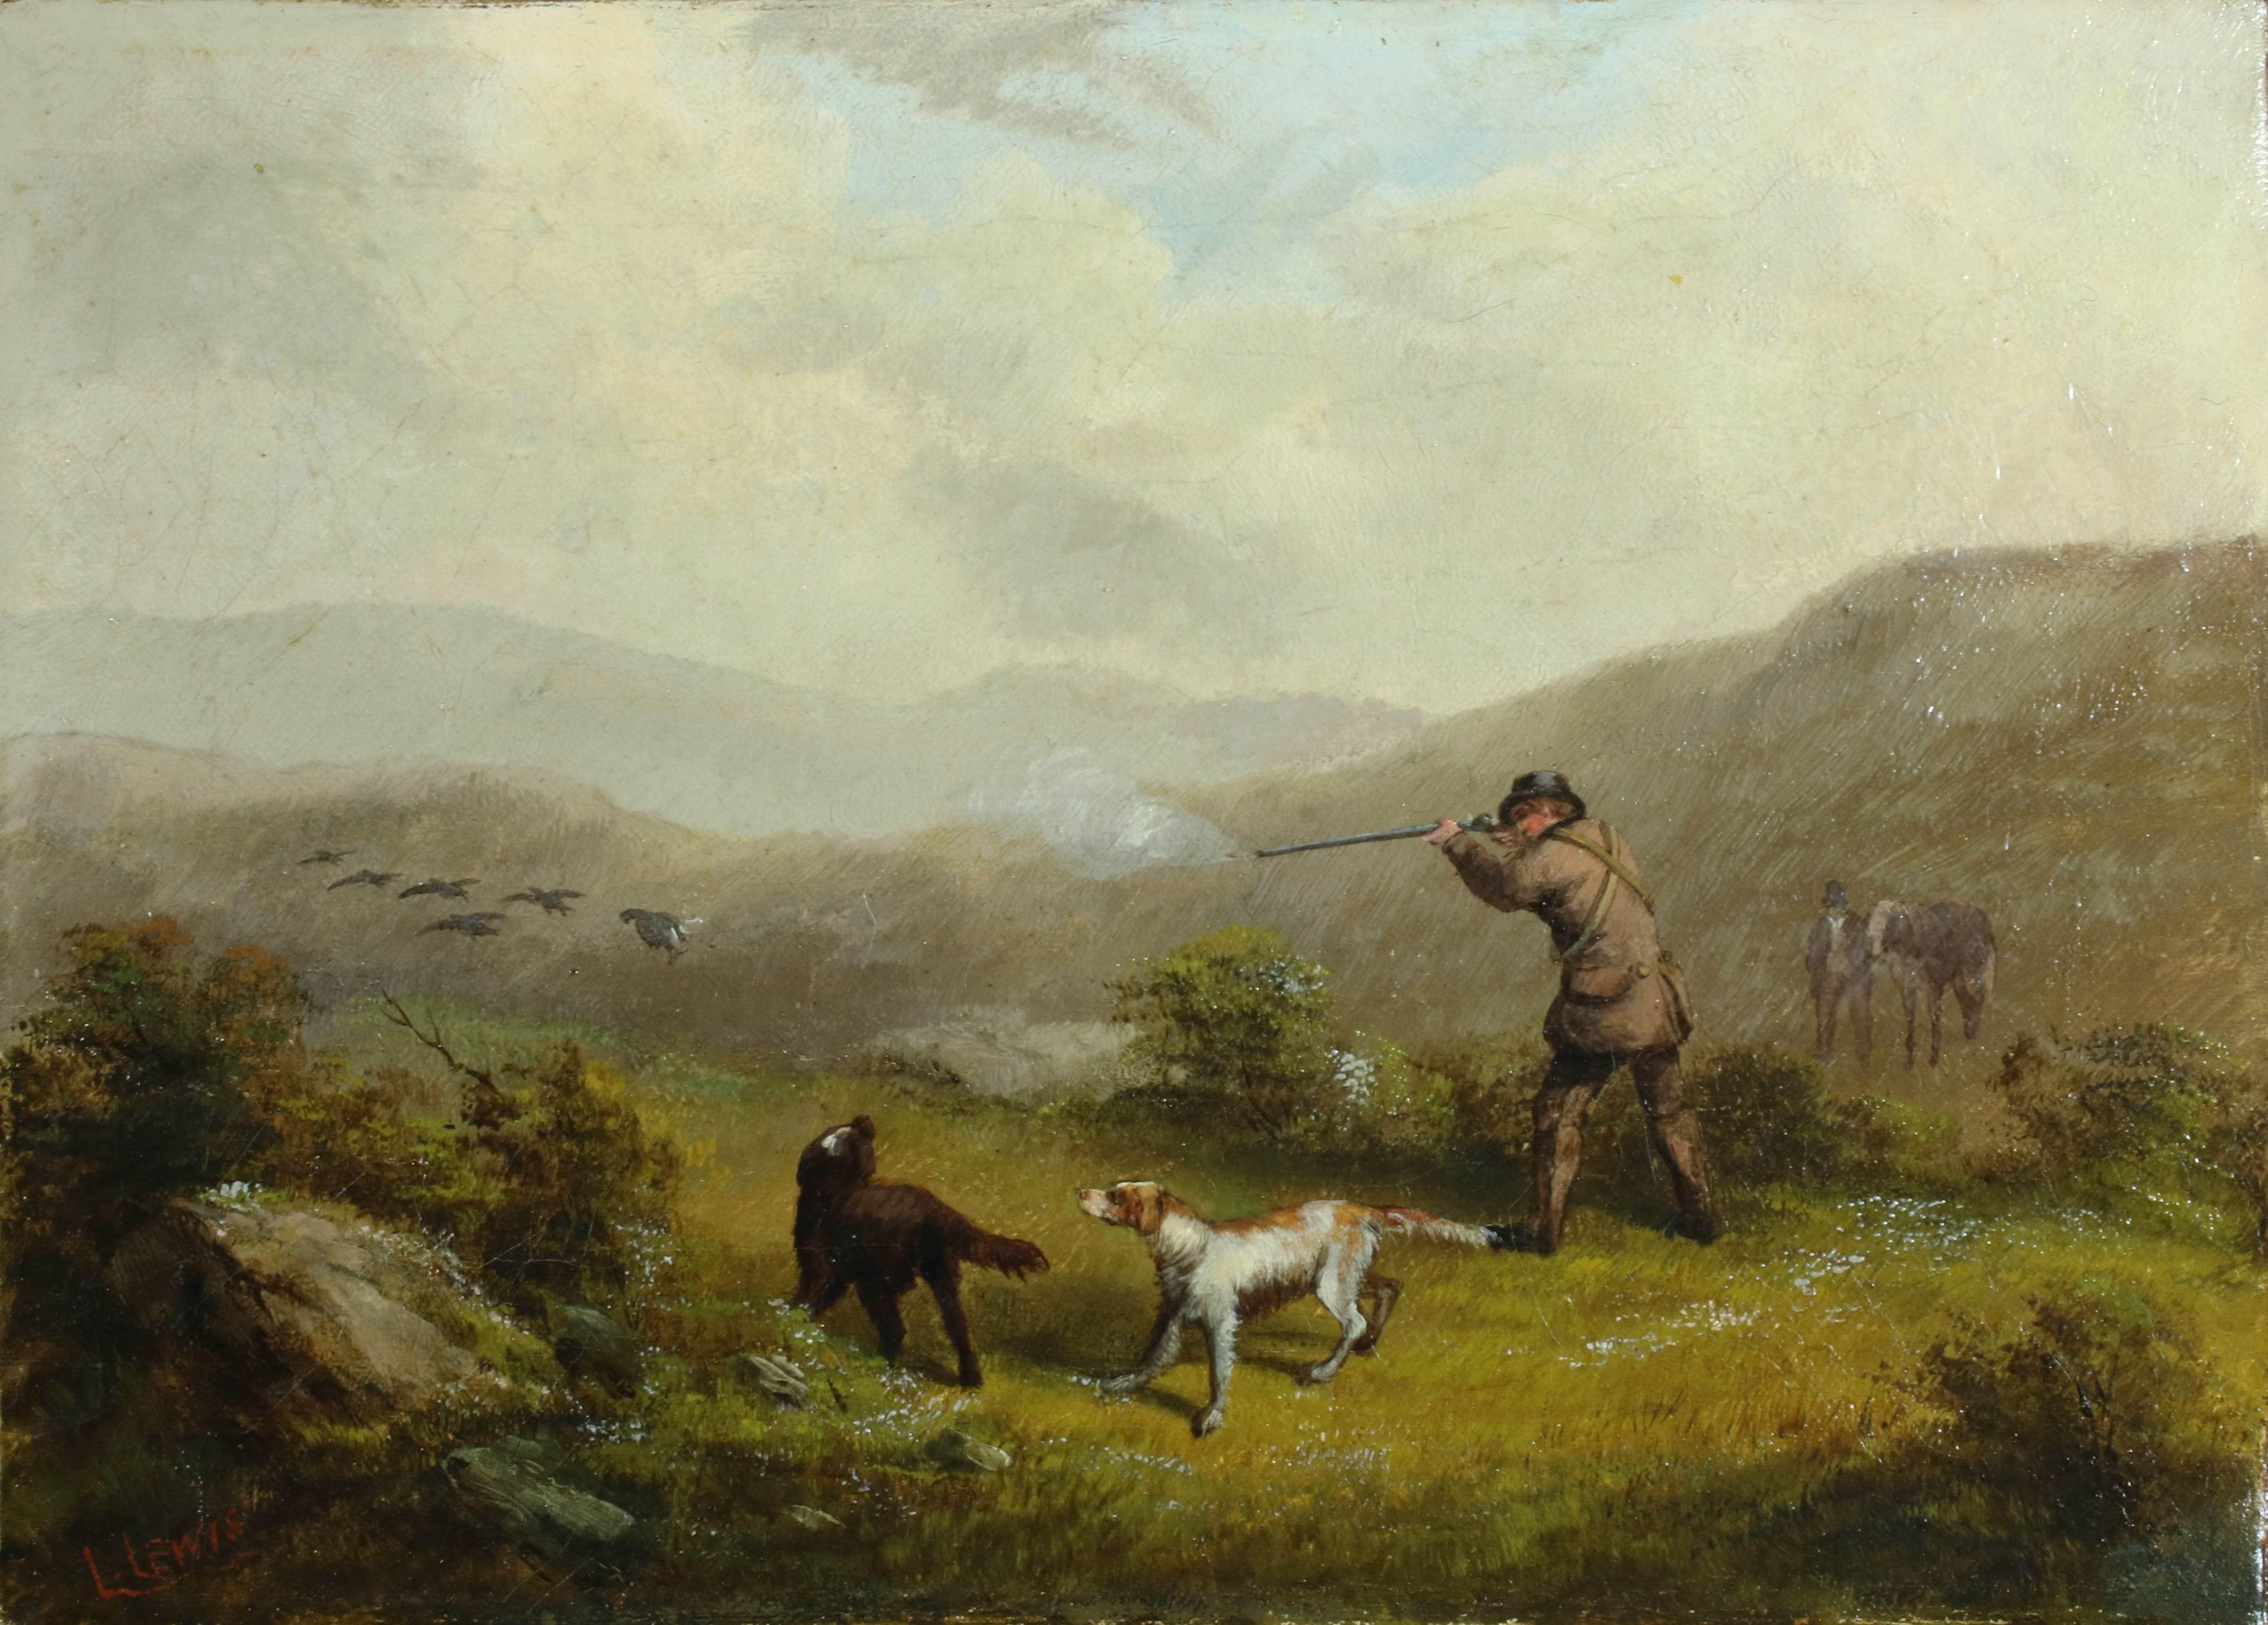 Lennard Lewis Animal Painting - C19 Grouse Shoot Gun with Hunting Dogs and grouse in hilly landscape, Oil 